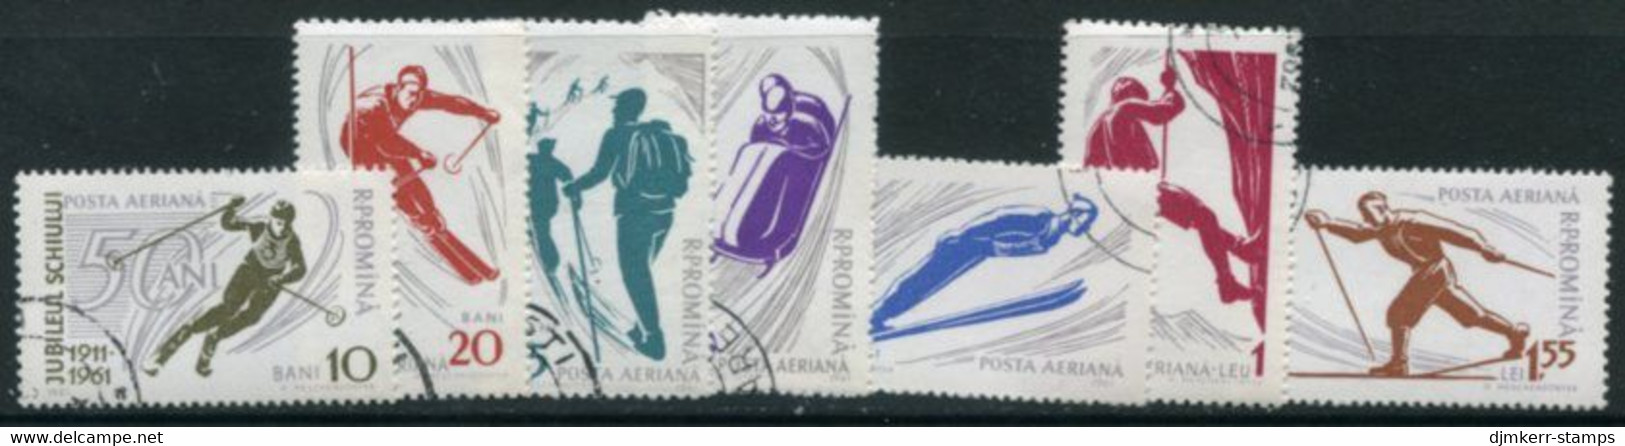 ROMANIA 1961 Winter Sports Perforated Used.  Michel 1951-57 - Usado